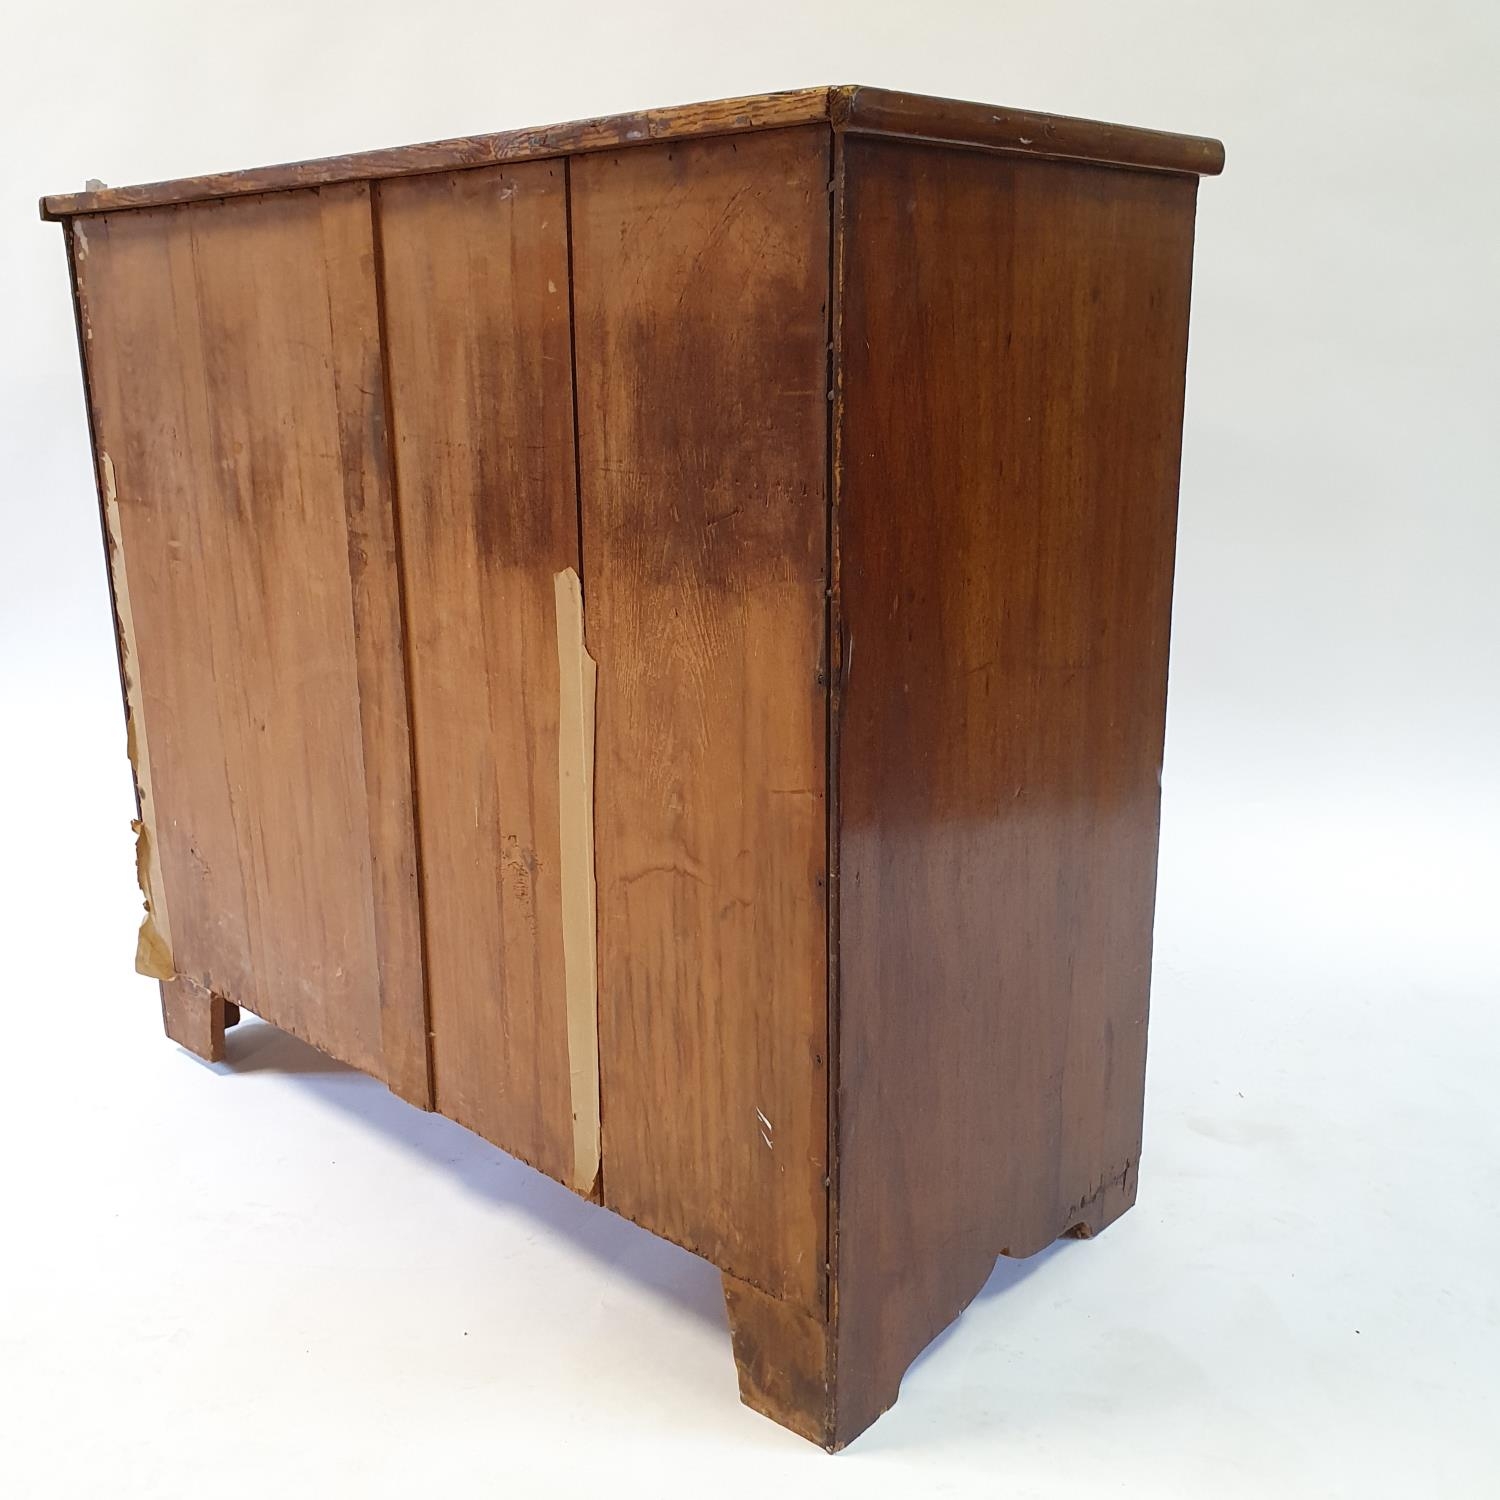 A 19th century mahogany bow front chest, having two short and three long drawers, 100 cm wide - Image 3 of 3